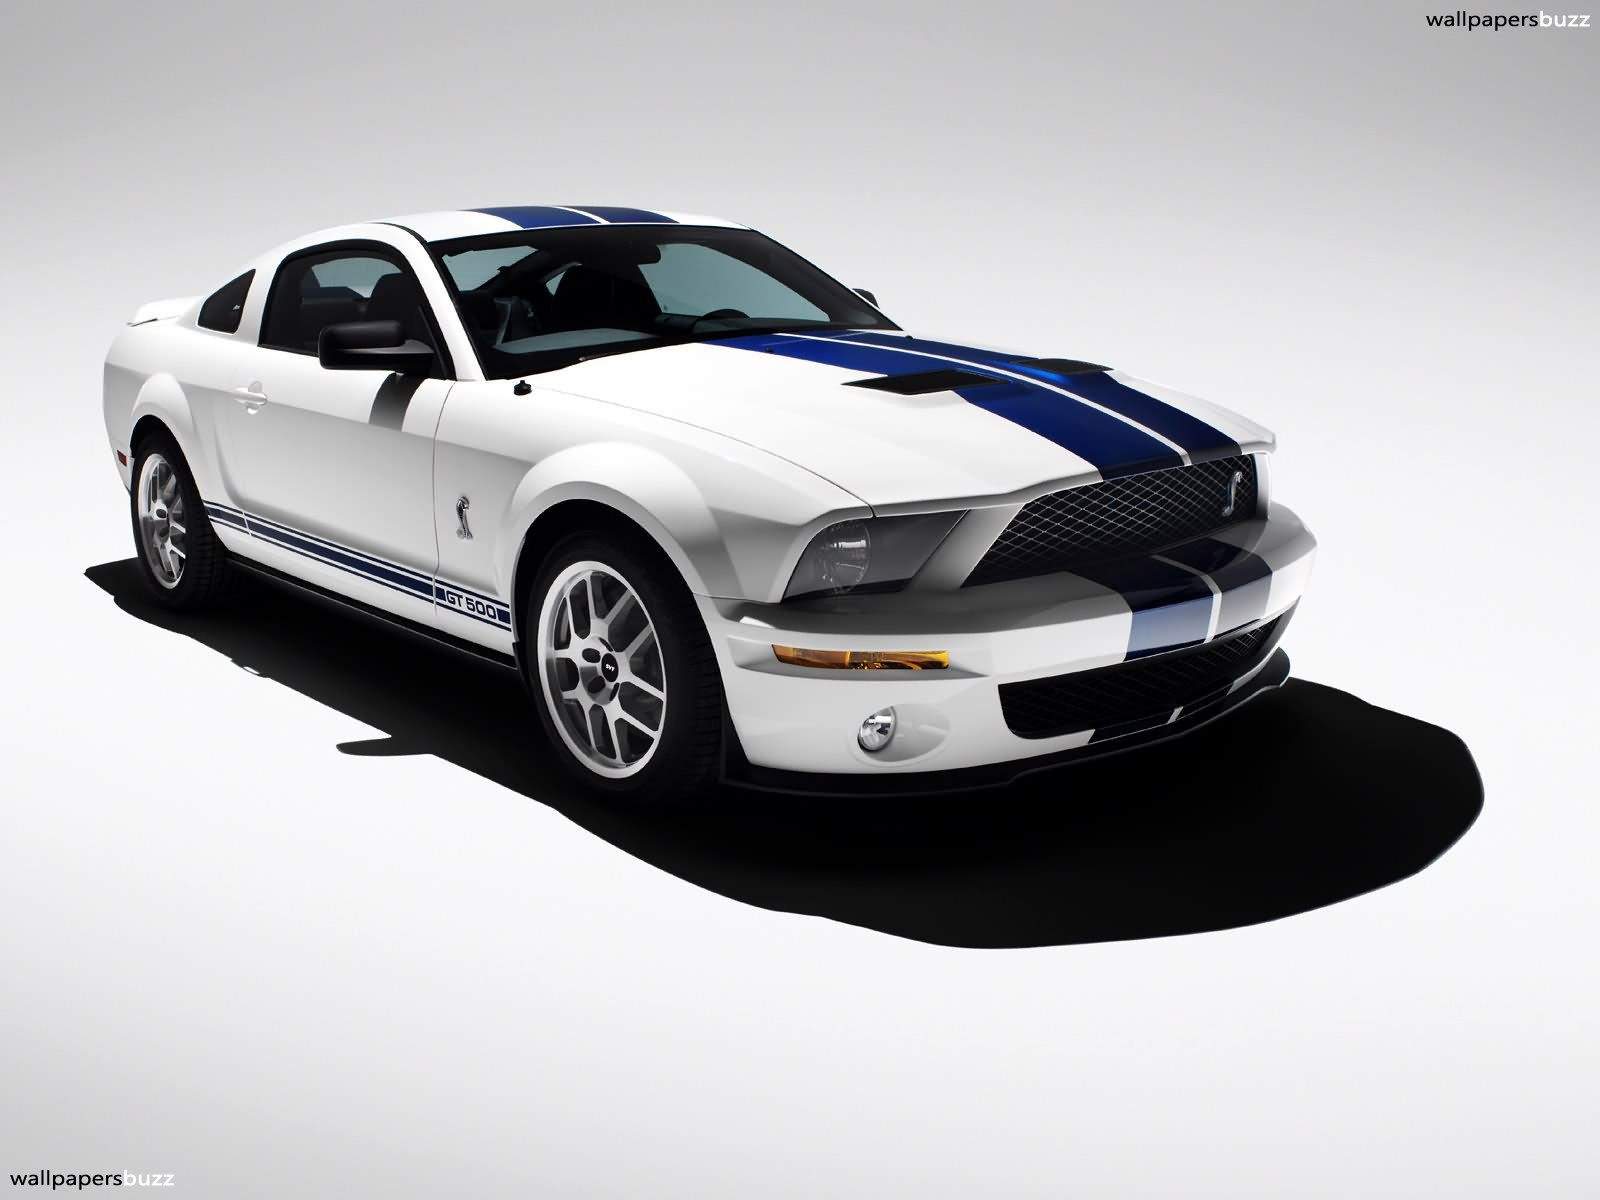 Ford Mustang Wallpaper Hd Wallpapers in Cars Imagescicom